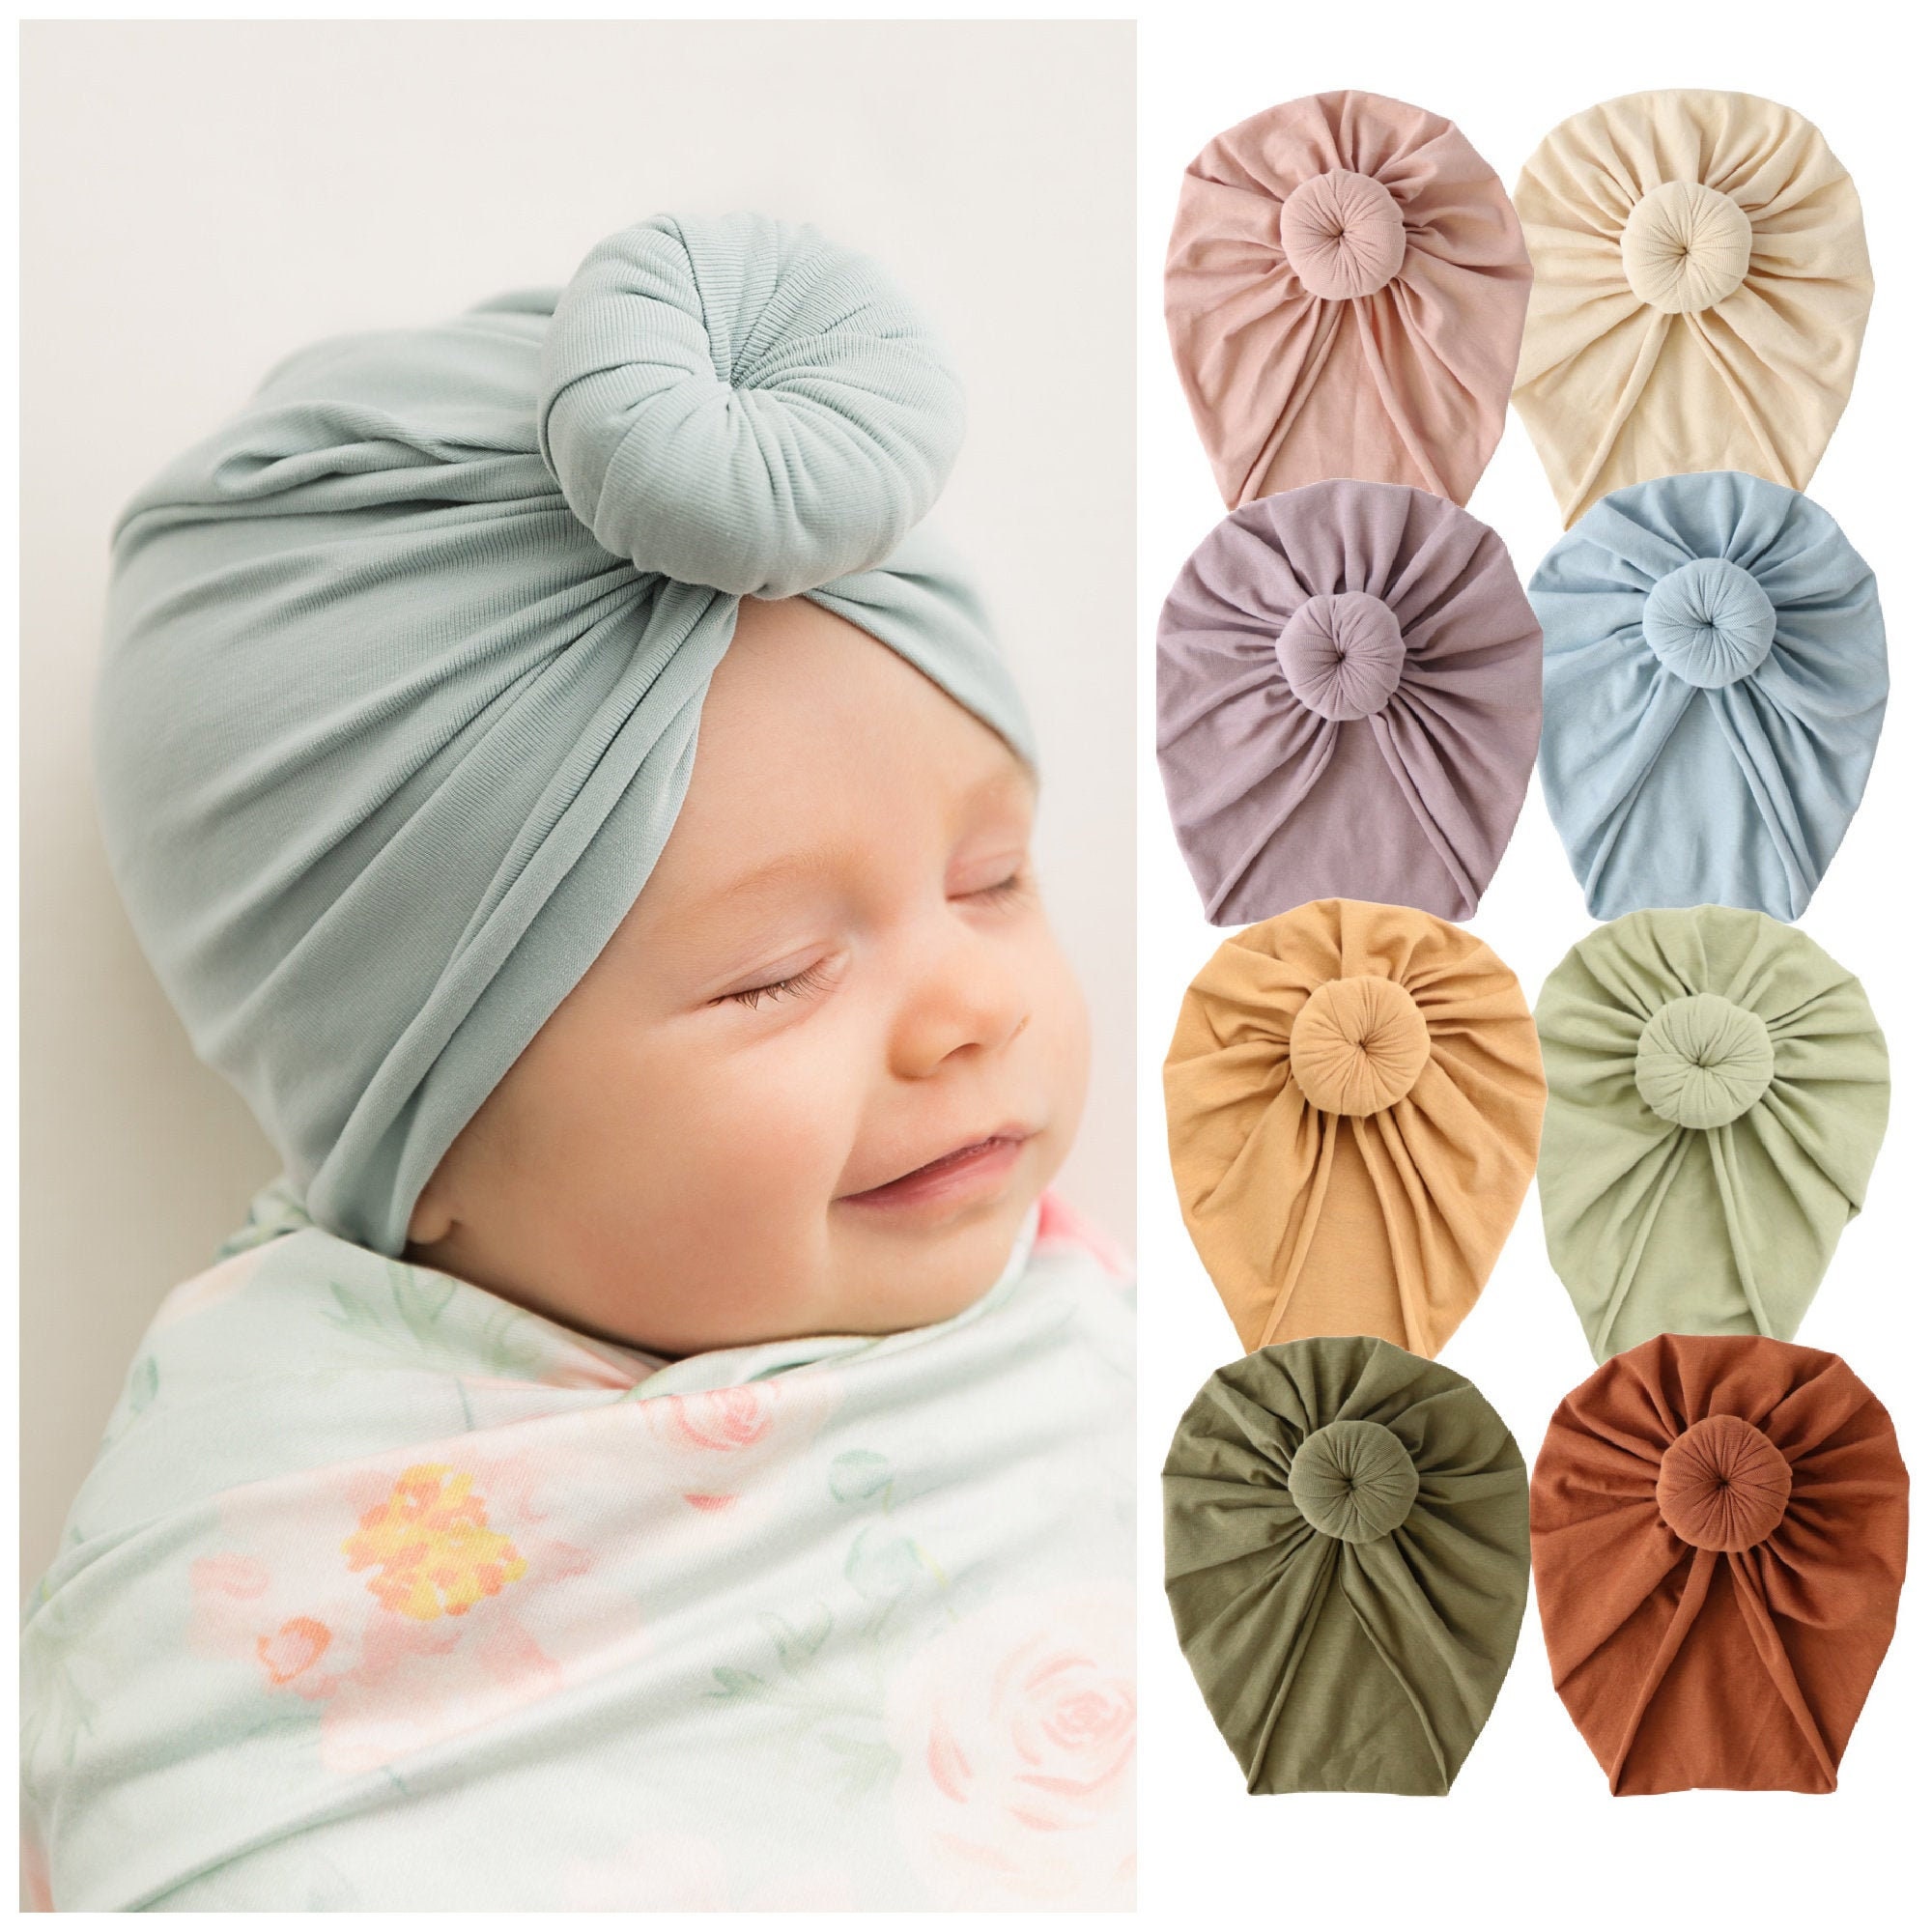 CANSHOW 4 Pack Soft Newborn Baby Girl Turban Hat Knot Hat Infant Baby Hats for Girls Head Cap Headwear 